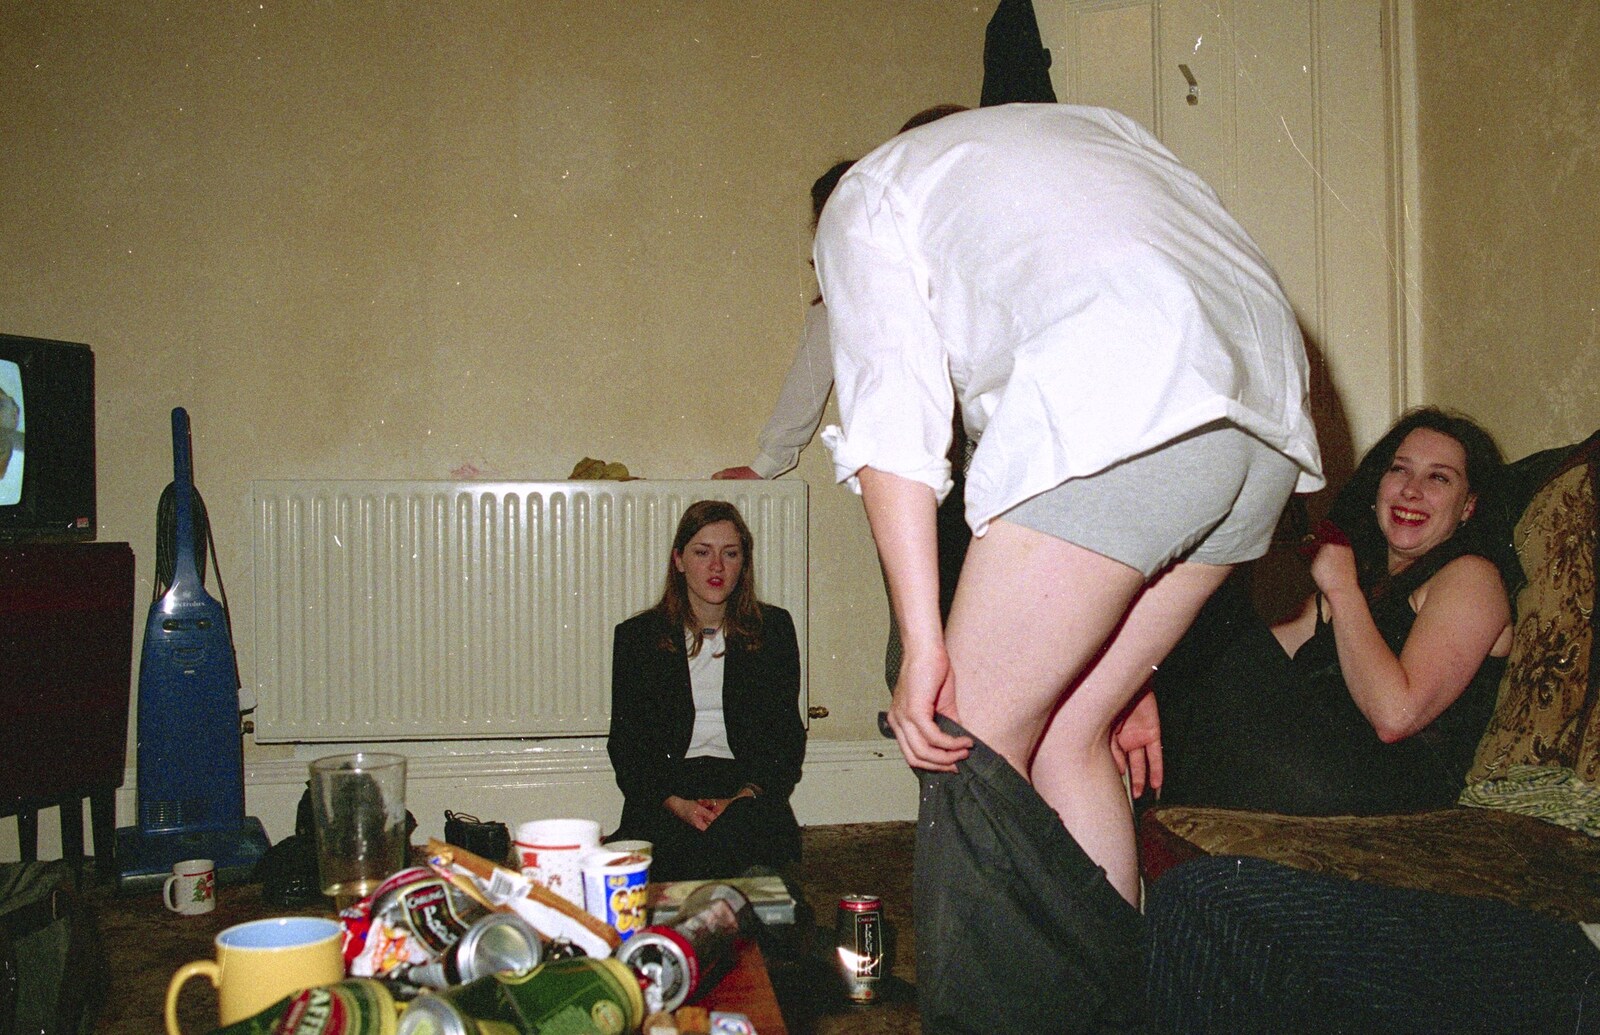 Sis Graduates from De Montfort, Leicester, Leicestershire - 9th August 1997: Trousers down for the girls